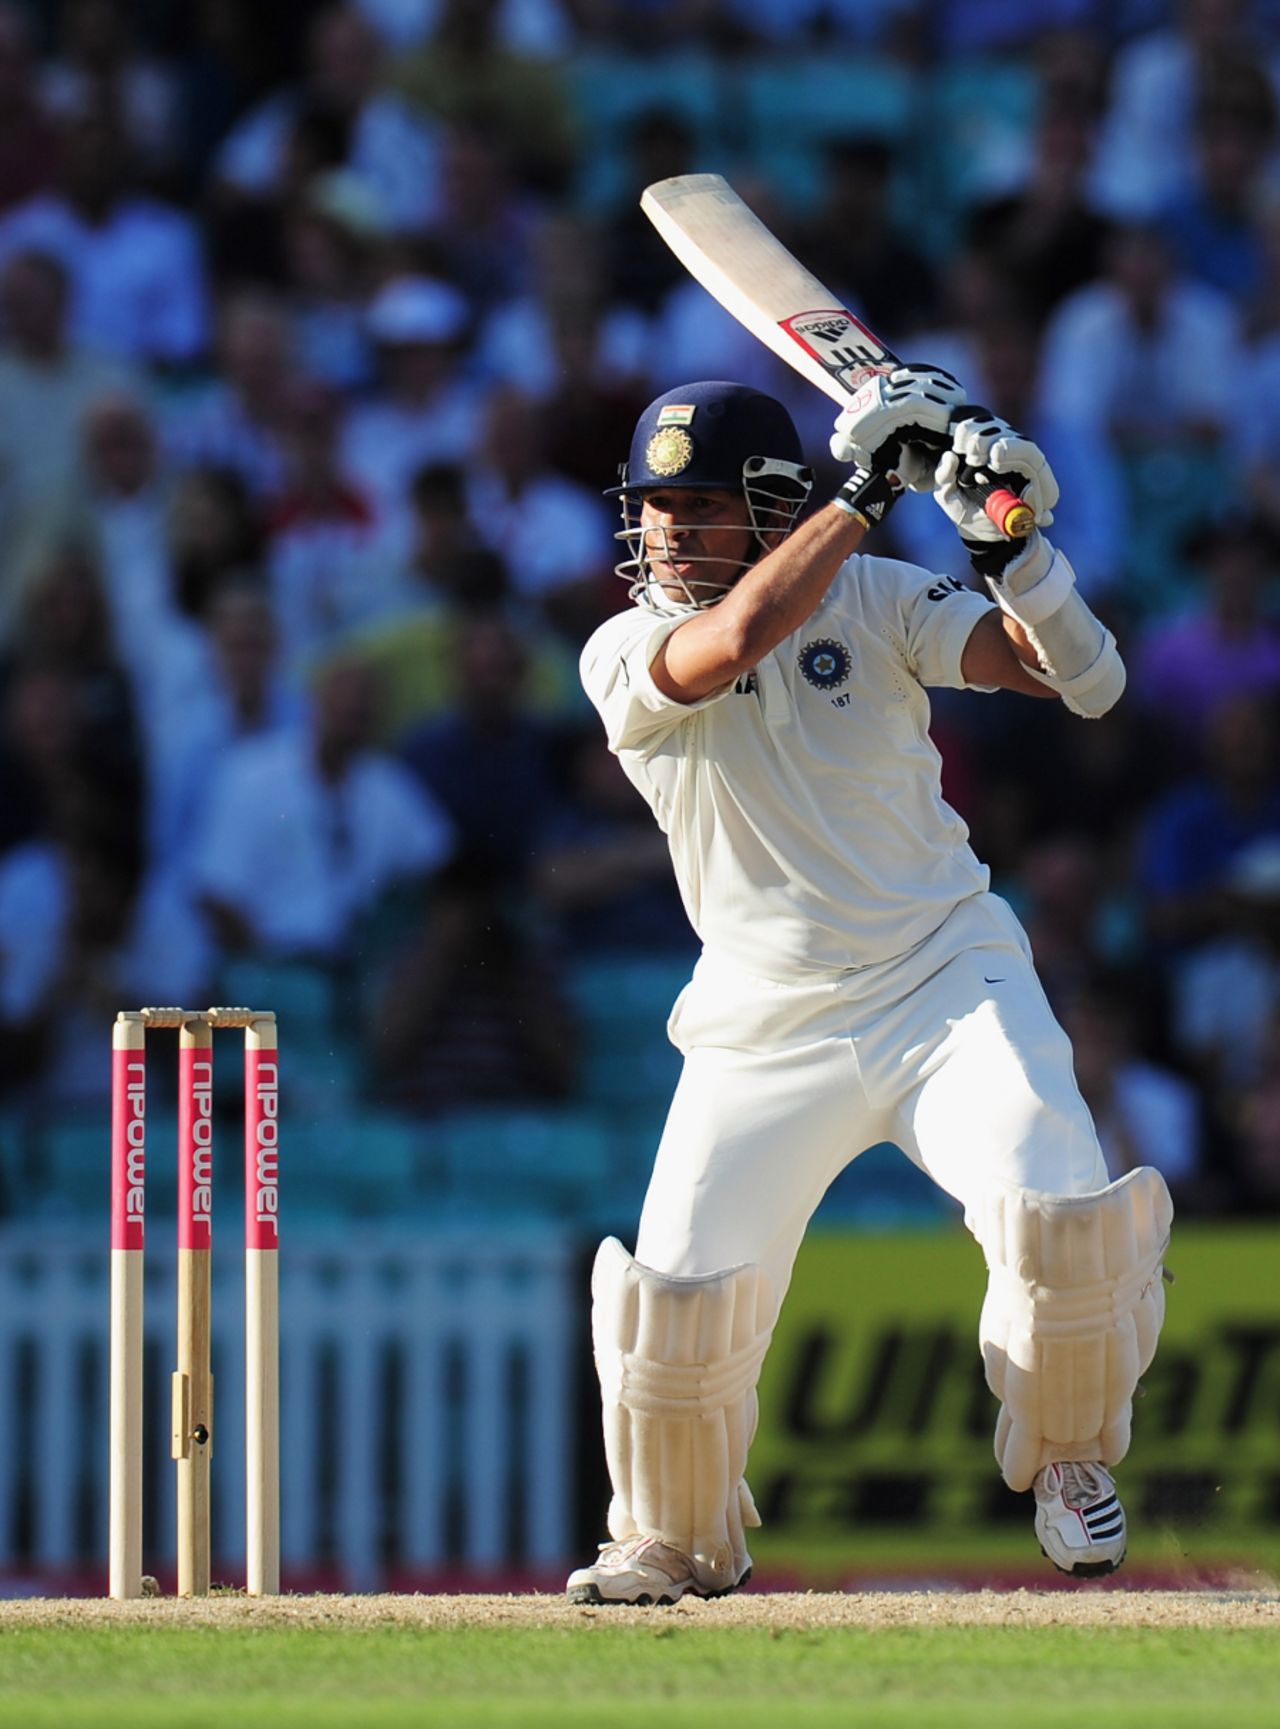 Sachin Tendulkar negotiated a testing passage of play to remain unbeaten at stumps on day four , England v India, 4th Test, The Oval, 4th day, August 21, 2011